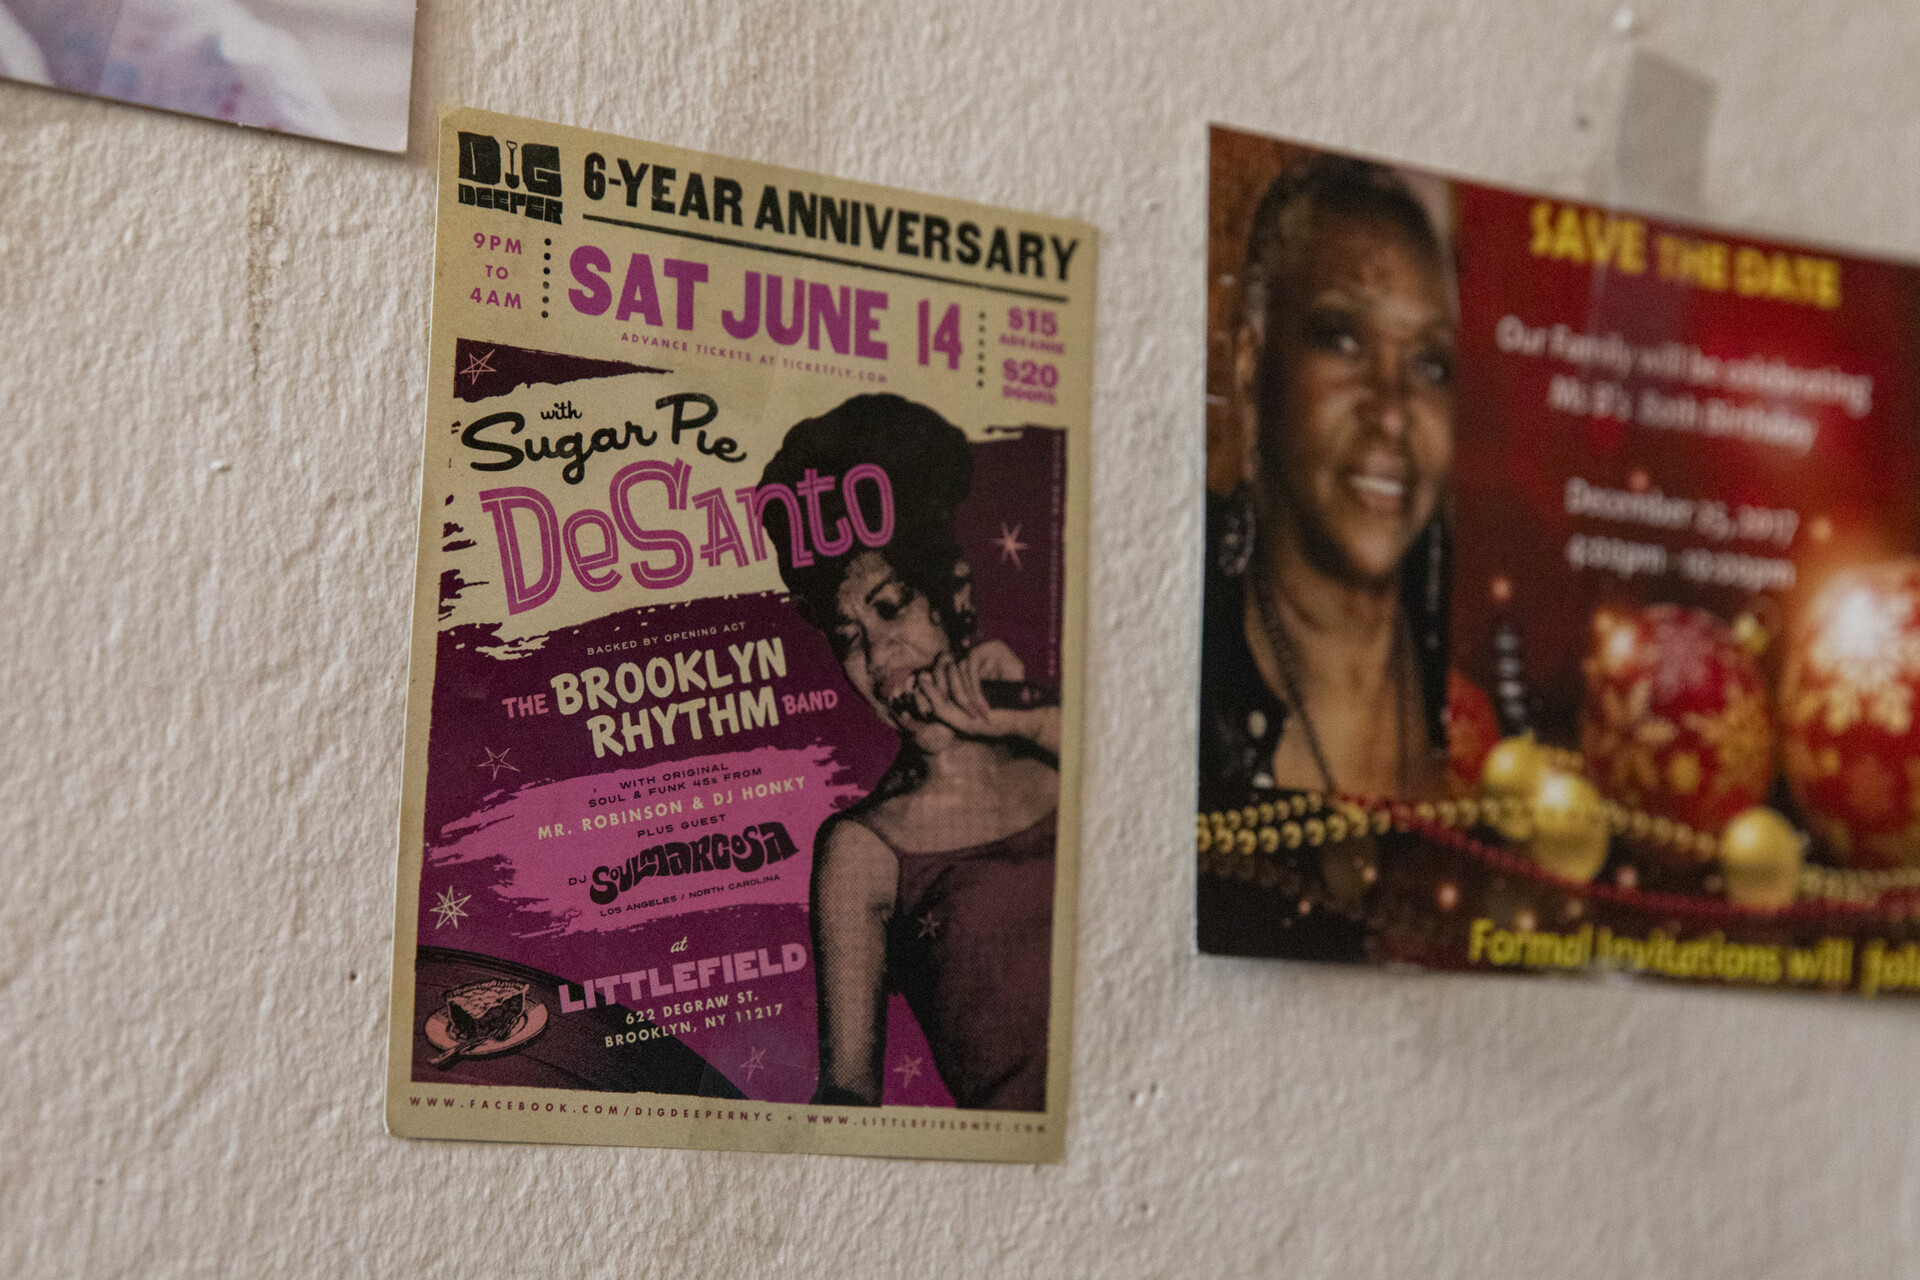 A concert poster from Sugar Pie DeSanto's show at the Littlefield in Brooklyn in 2014.